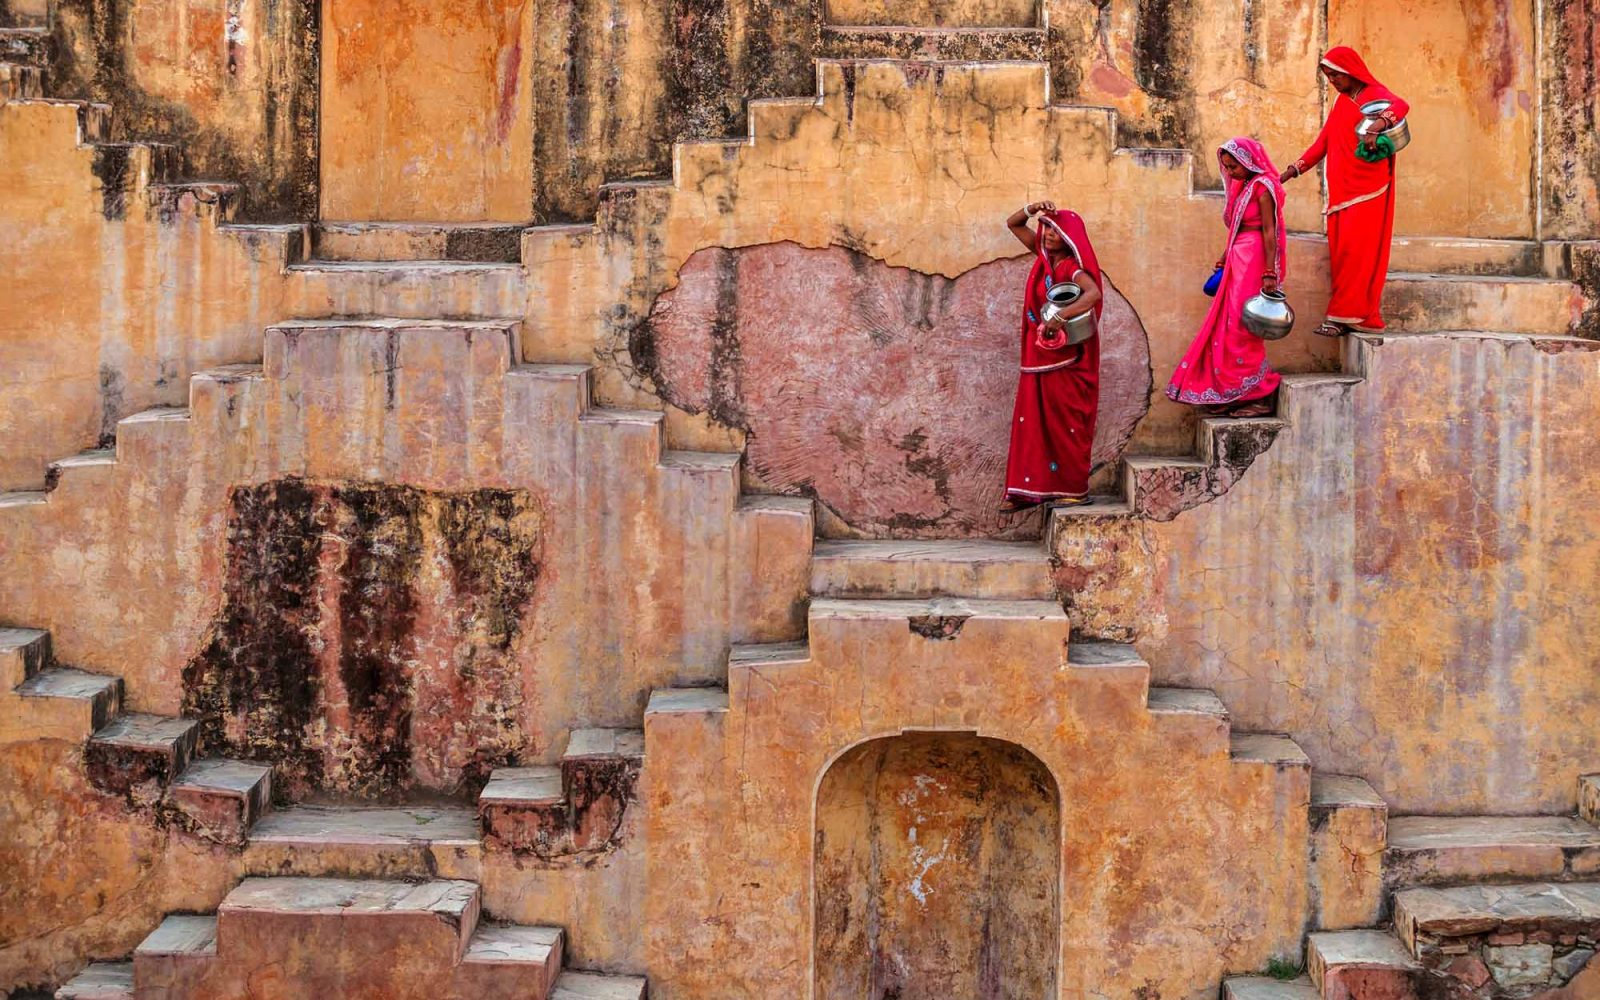 An image of Indian women carrying water from a stepwell near Jaipur.